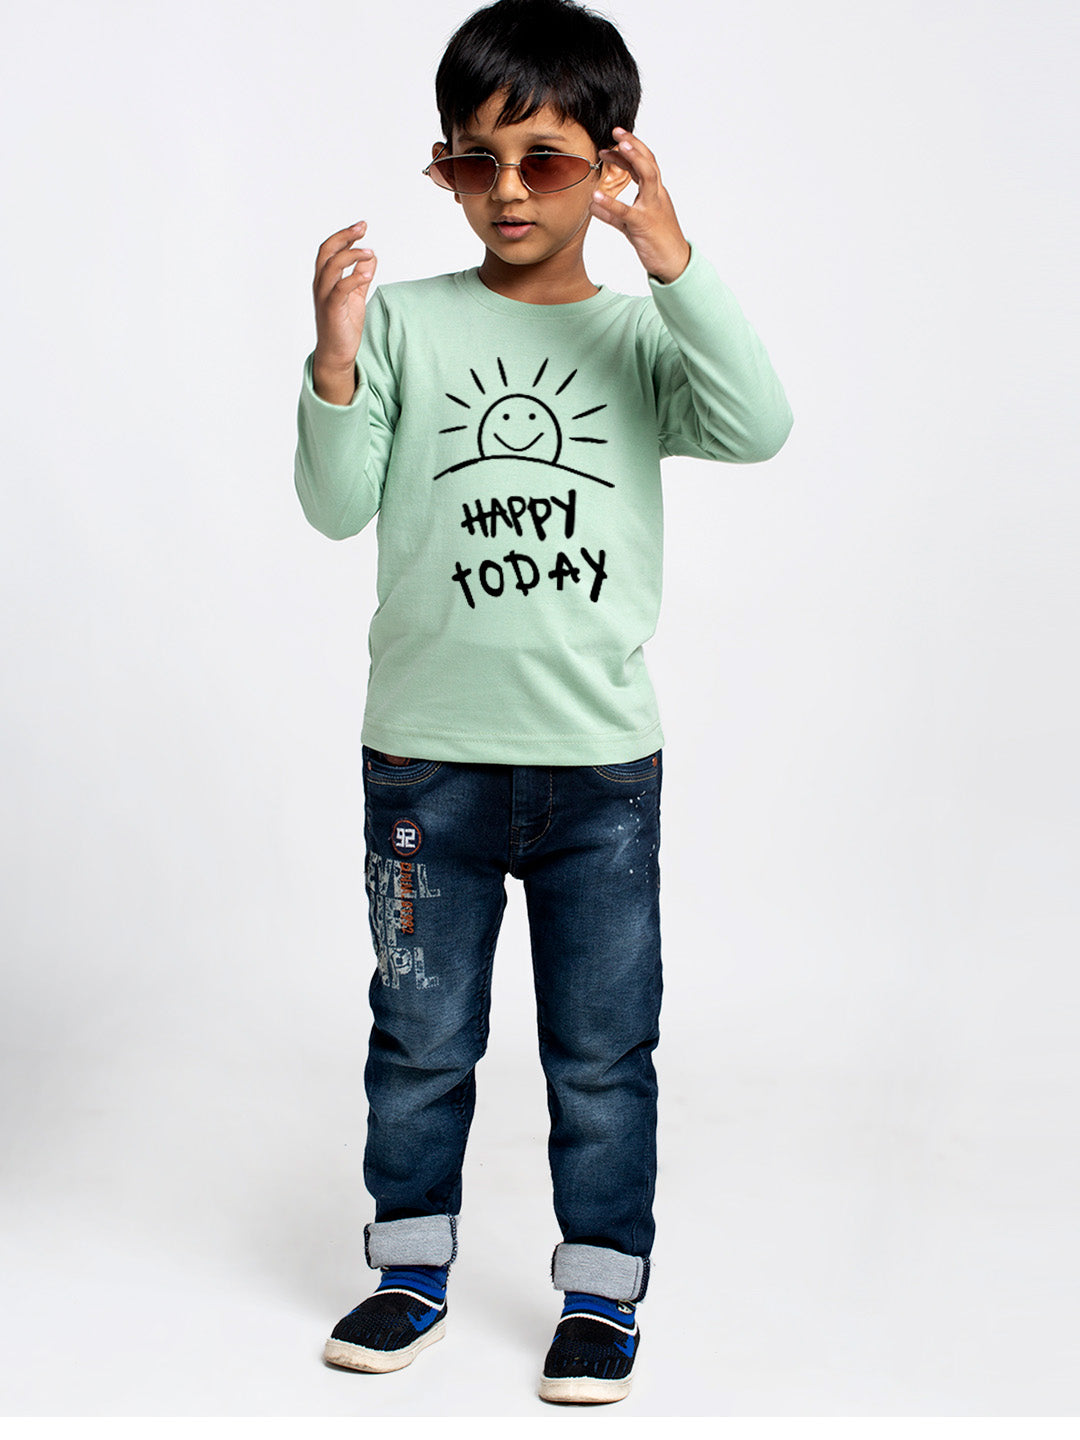 Kids happy today printed full sleeves t-shirt - Friskers